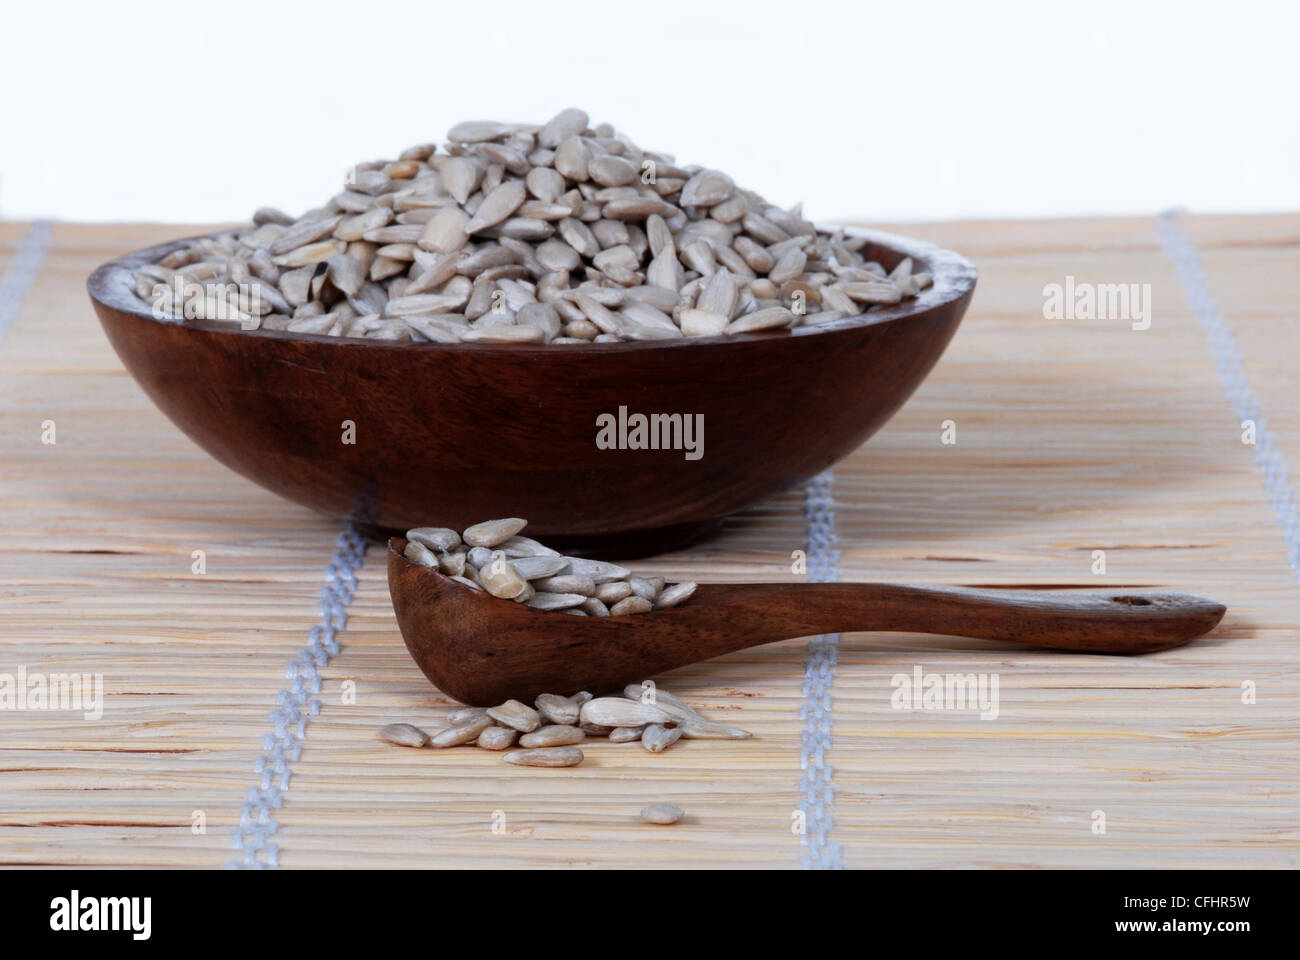 Sunflower seeds in a wood spoon, bowl. Stock Photo